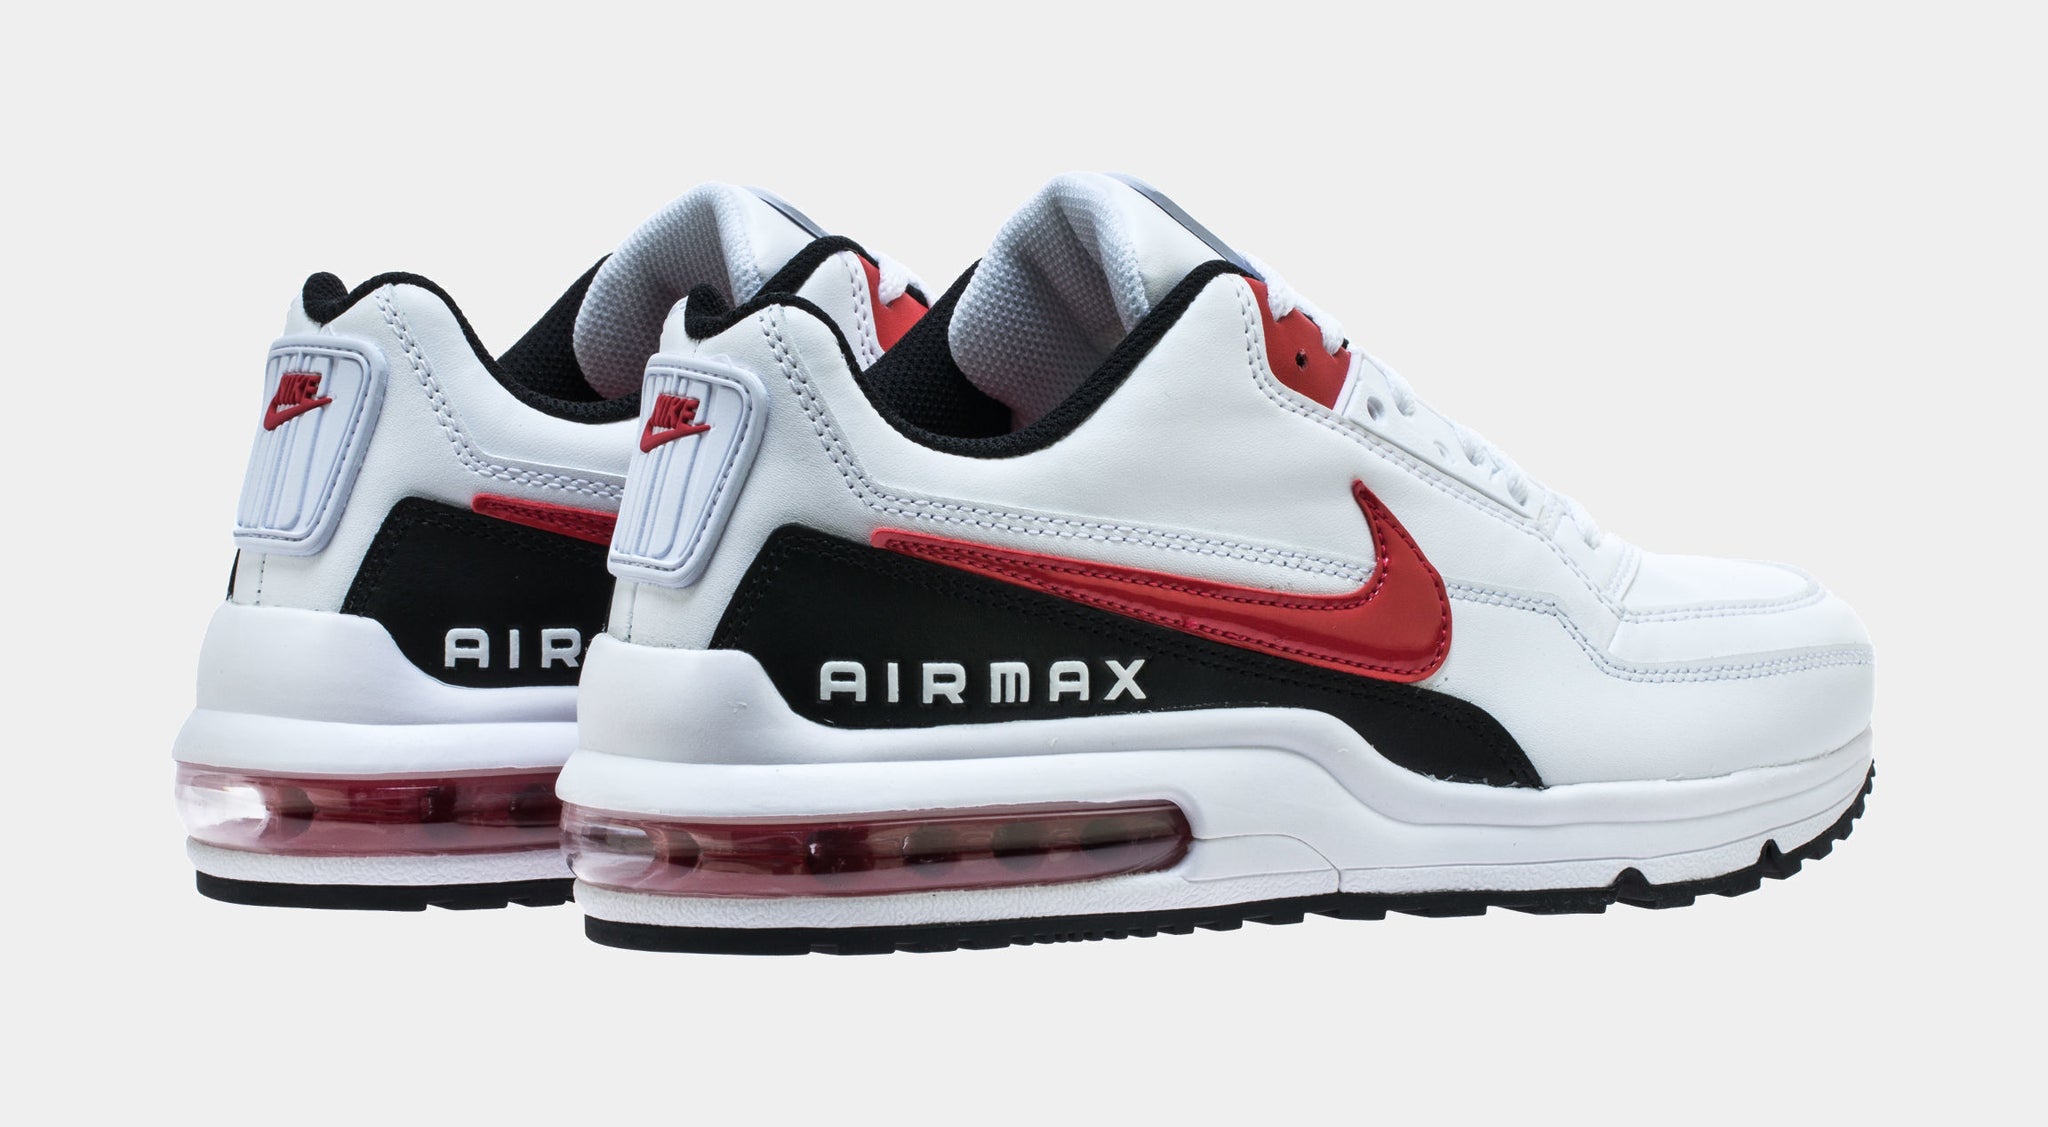 Nike Air Max 3 sneakers in white, red and black